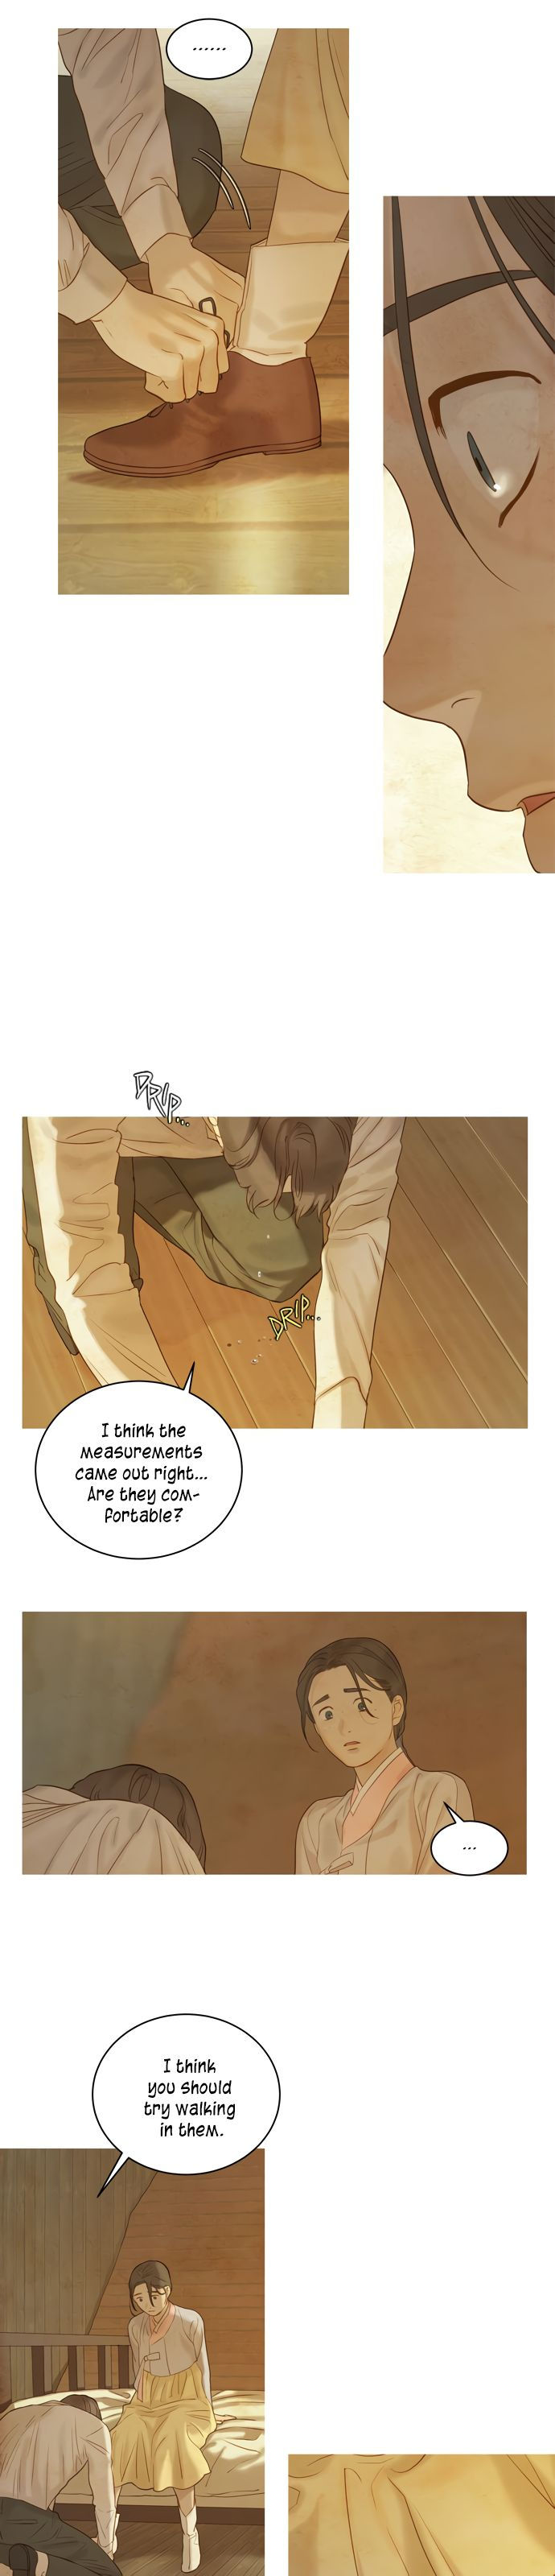 Gorae Byul - The Gyeongseong Mermaid - Chapter 23 Page 13